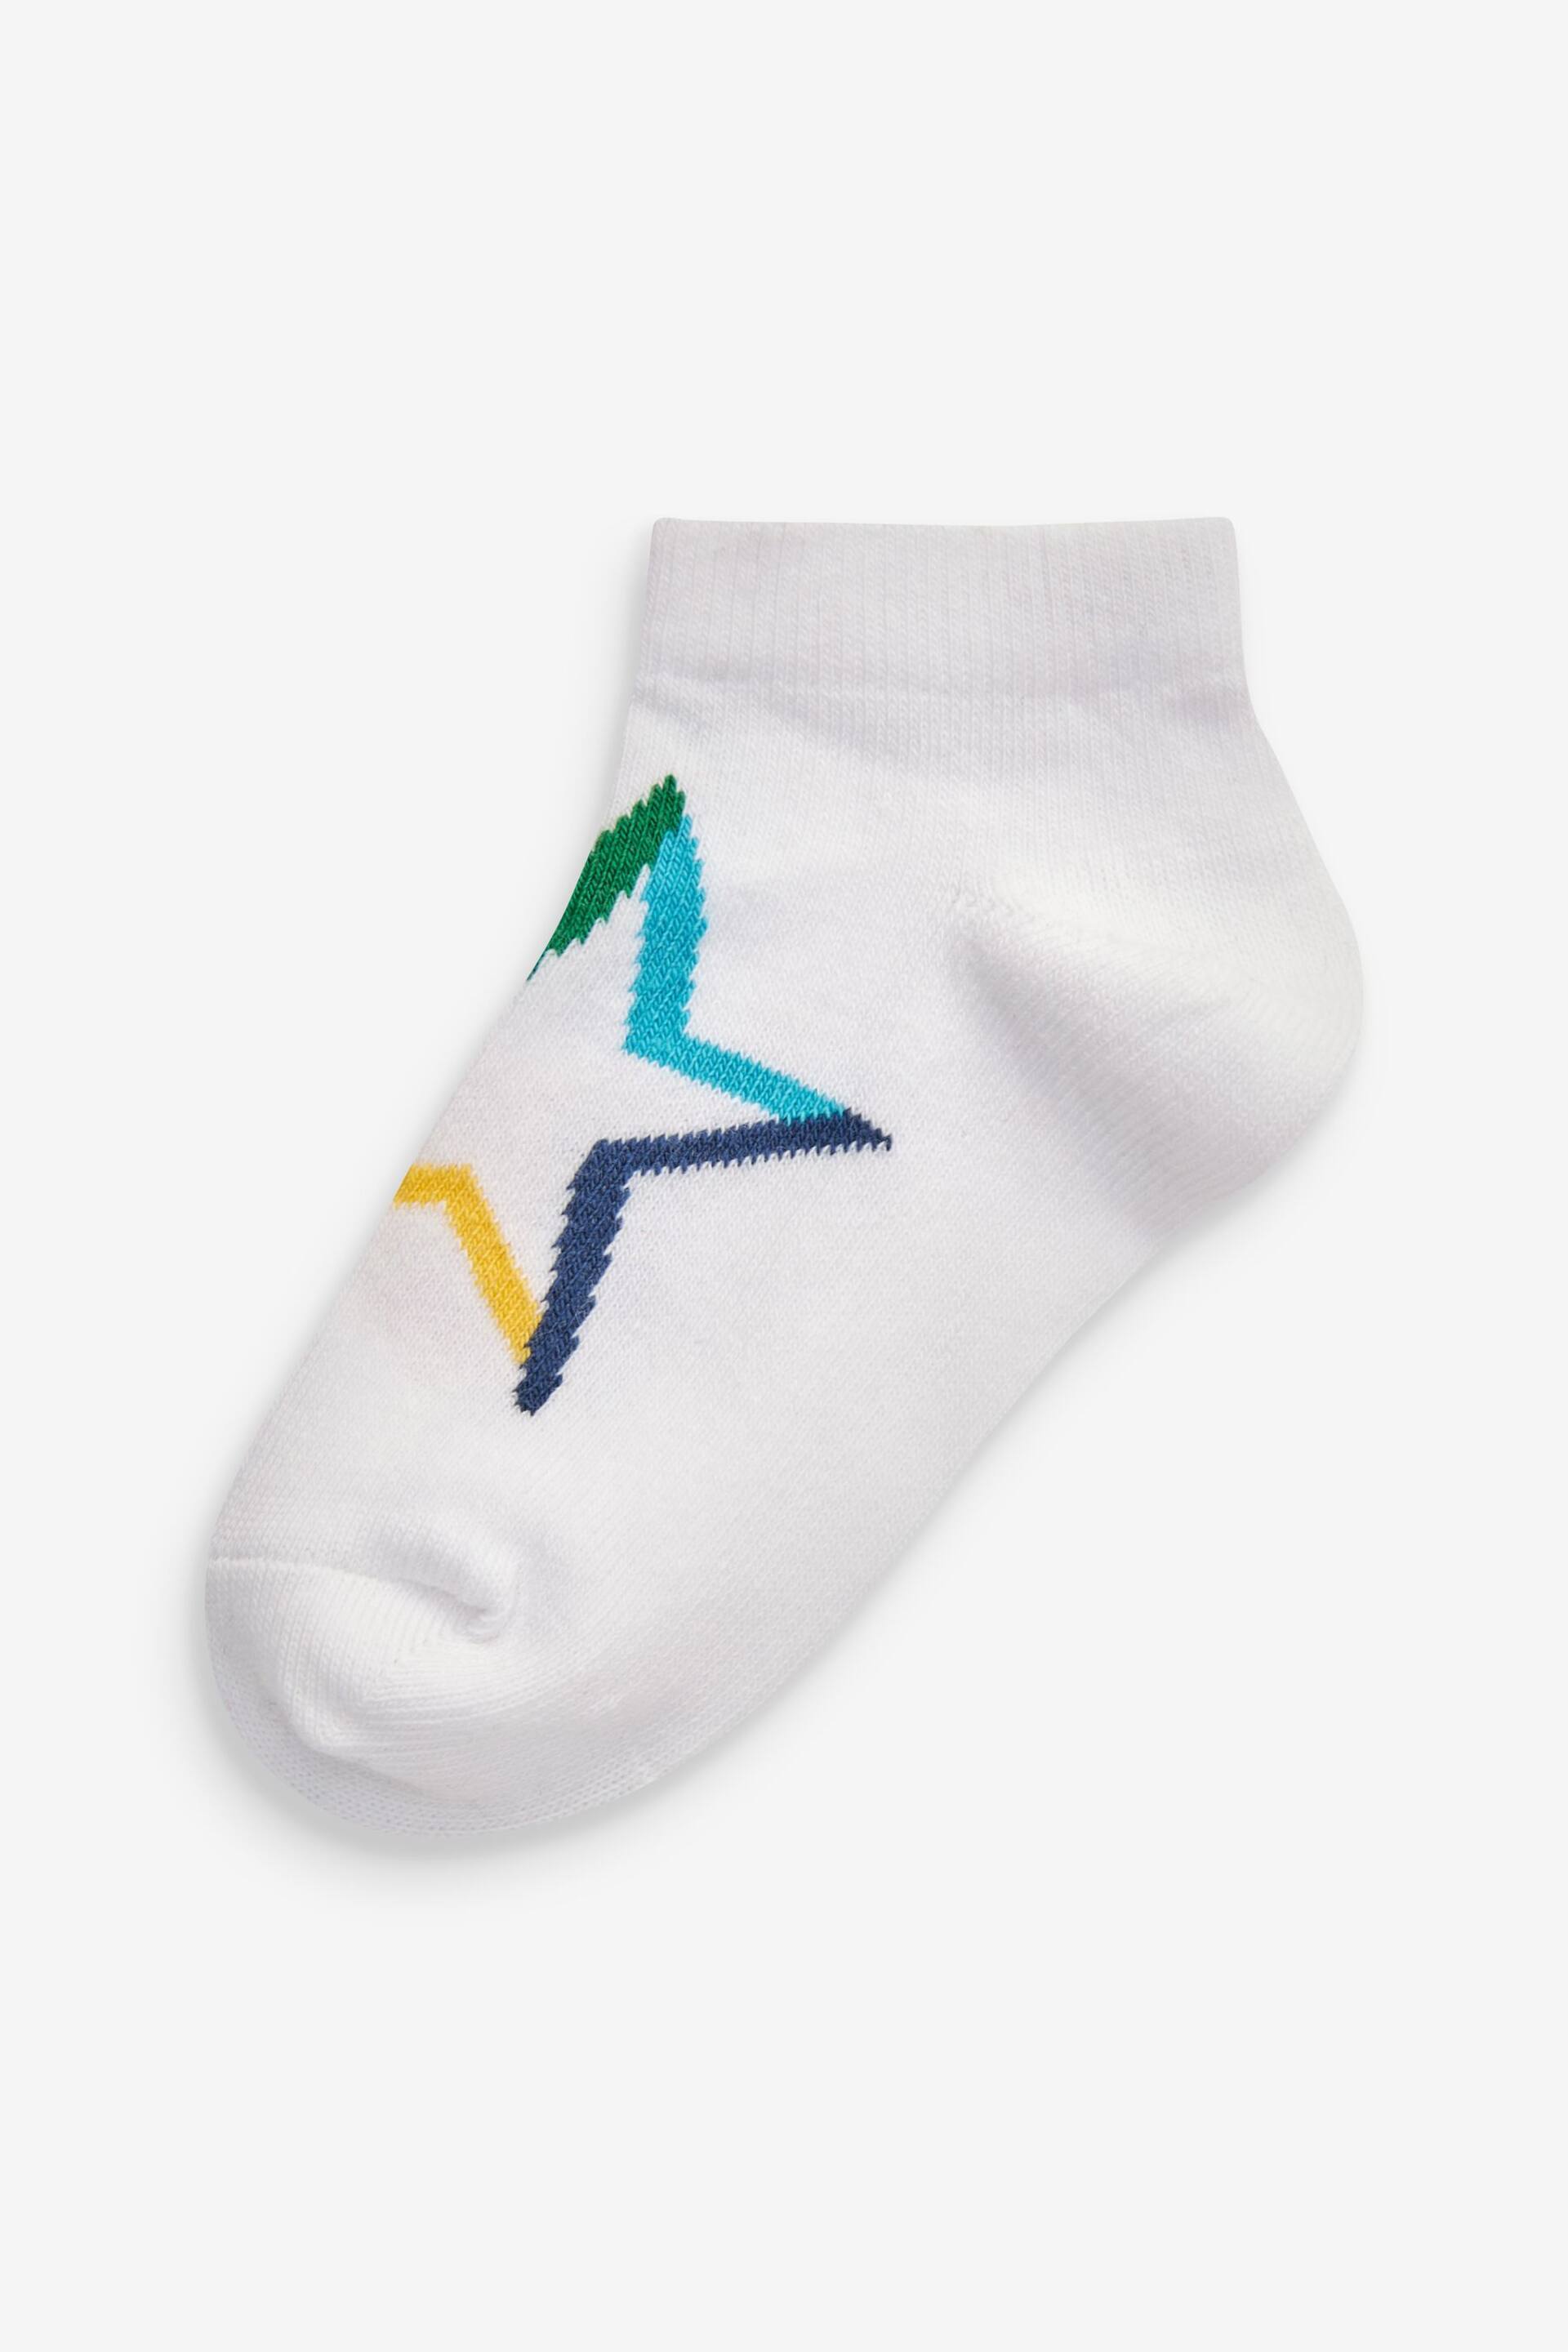 White/Blue/Red Star Cotton Rich Trainer Socks 7 Pack - Image 5 of 8